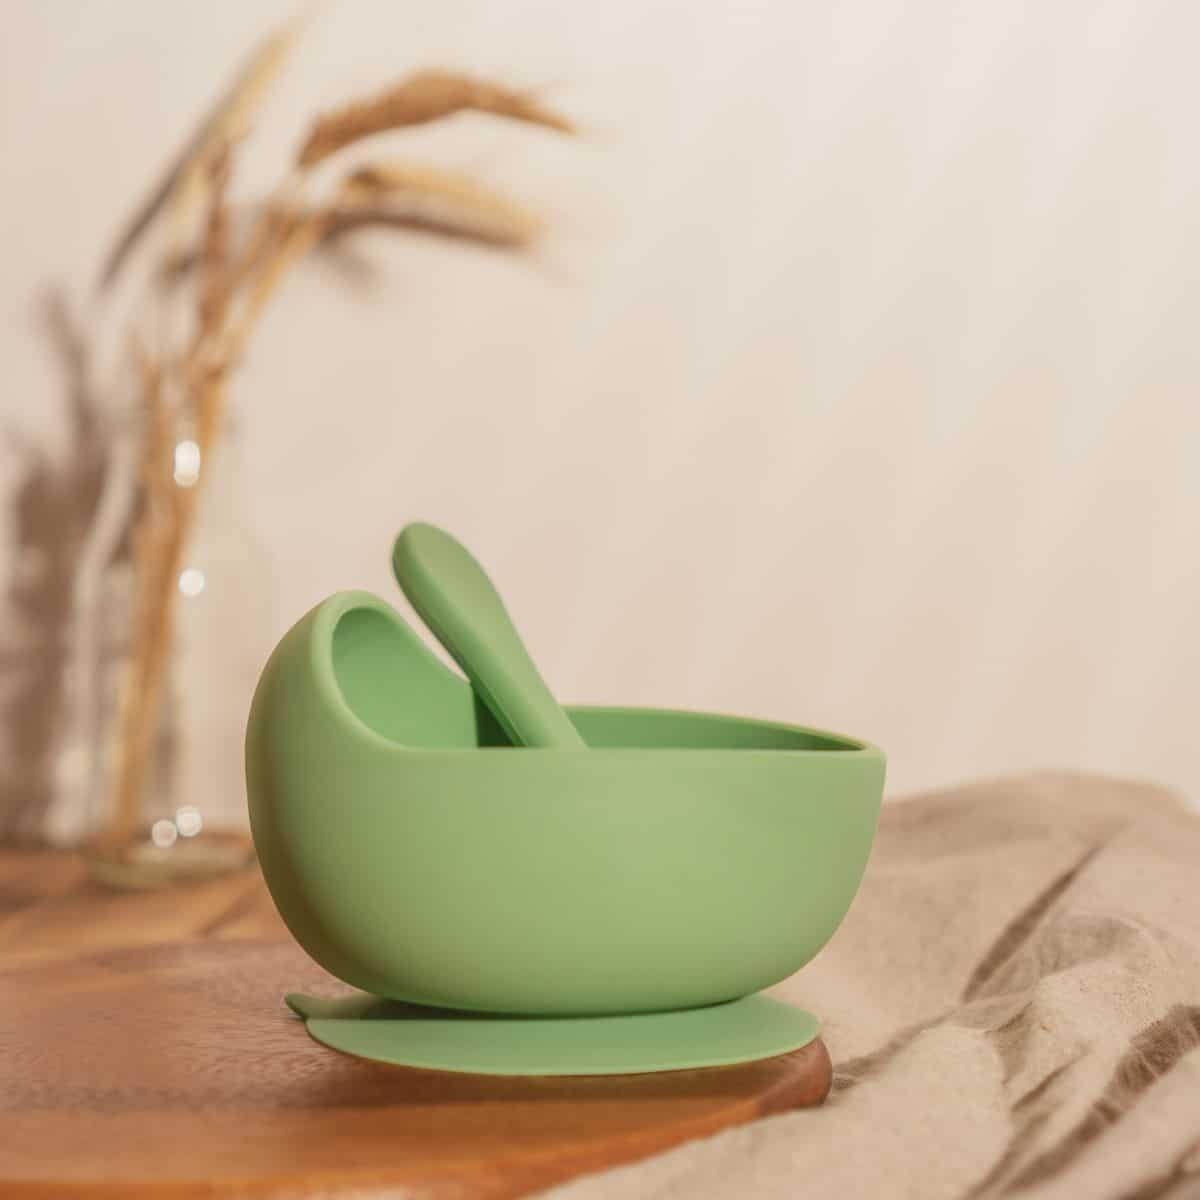 Modern green silicone bowl with spoon on wooden table.